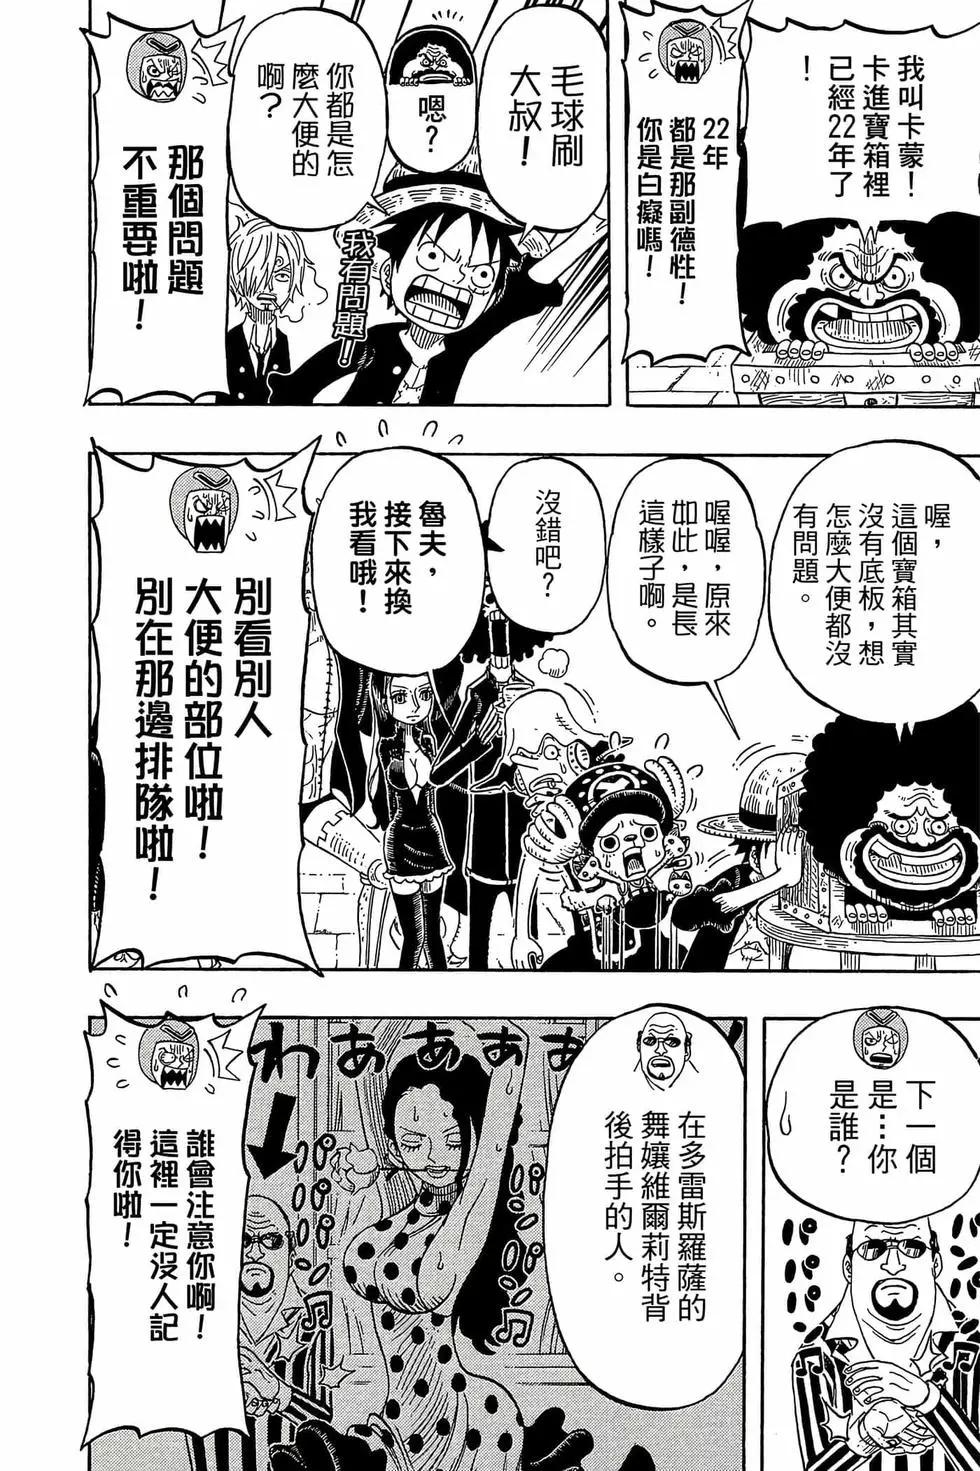 One piece party - 第01卷(4/4) - 1